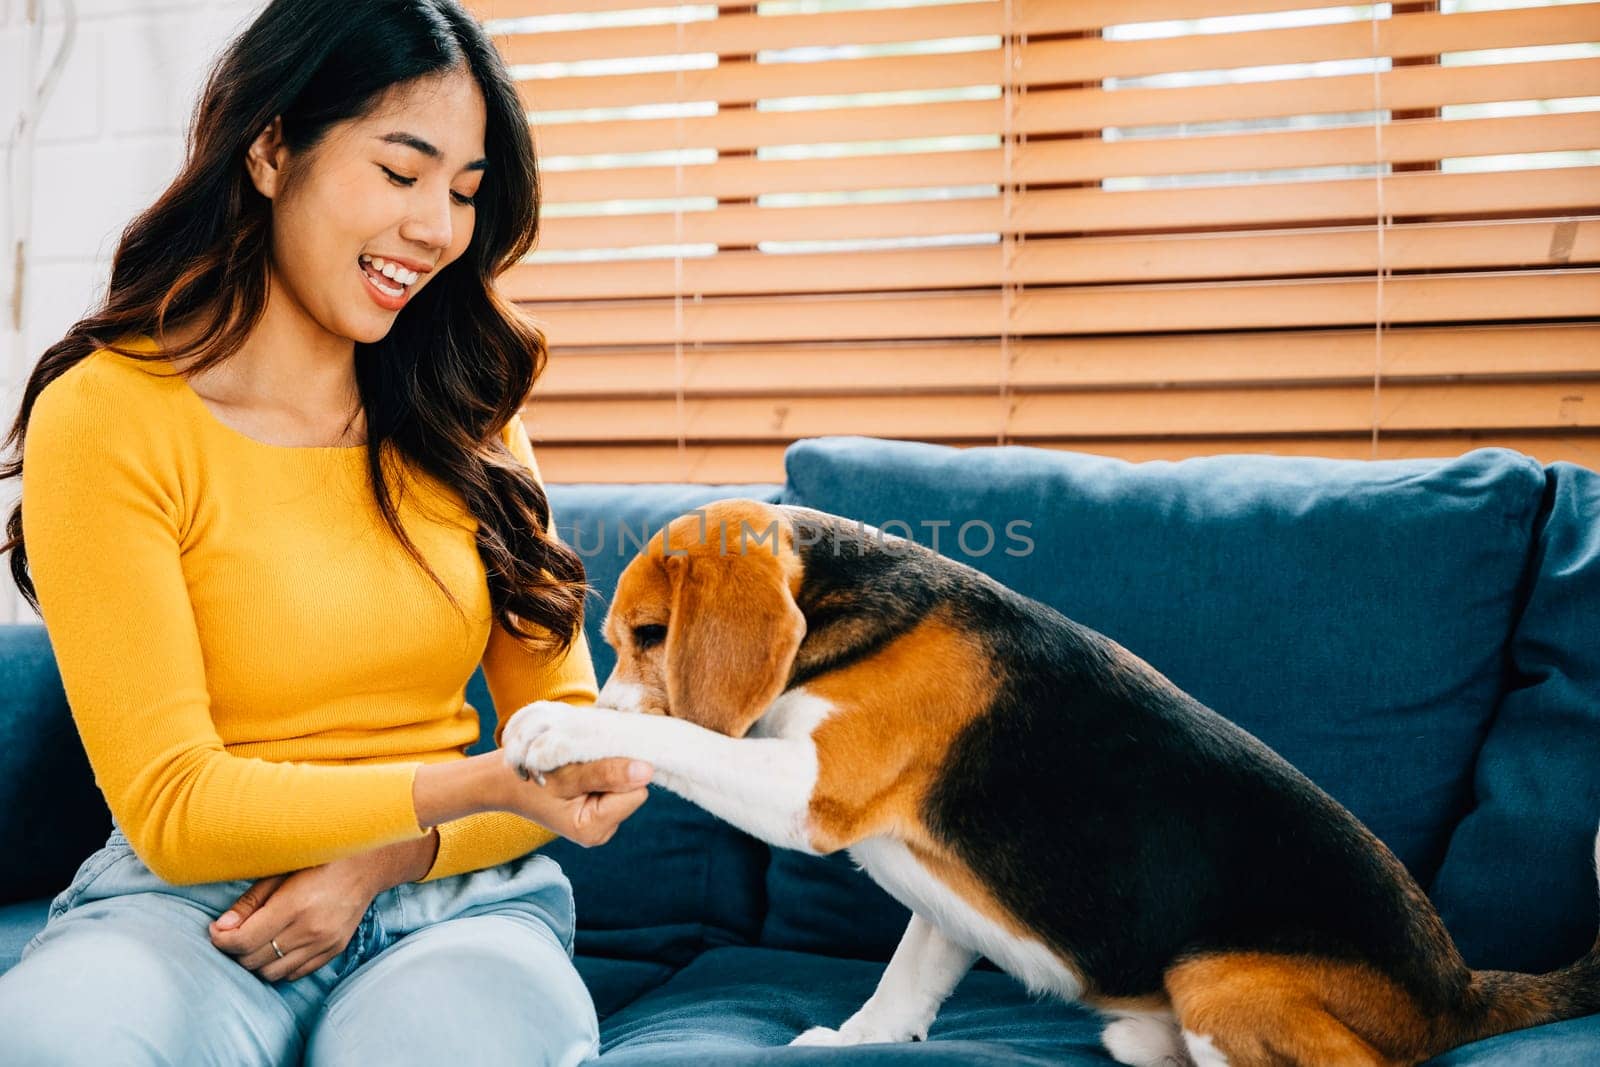 In their cozy house, a woman and her Beagle dog create a delightful portrait of loyalty and friendship on the sofa. The cute dog's playful antics bring joy to their exclusive time together. Pet love